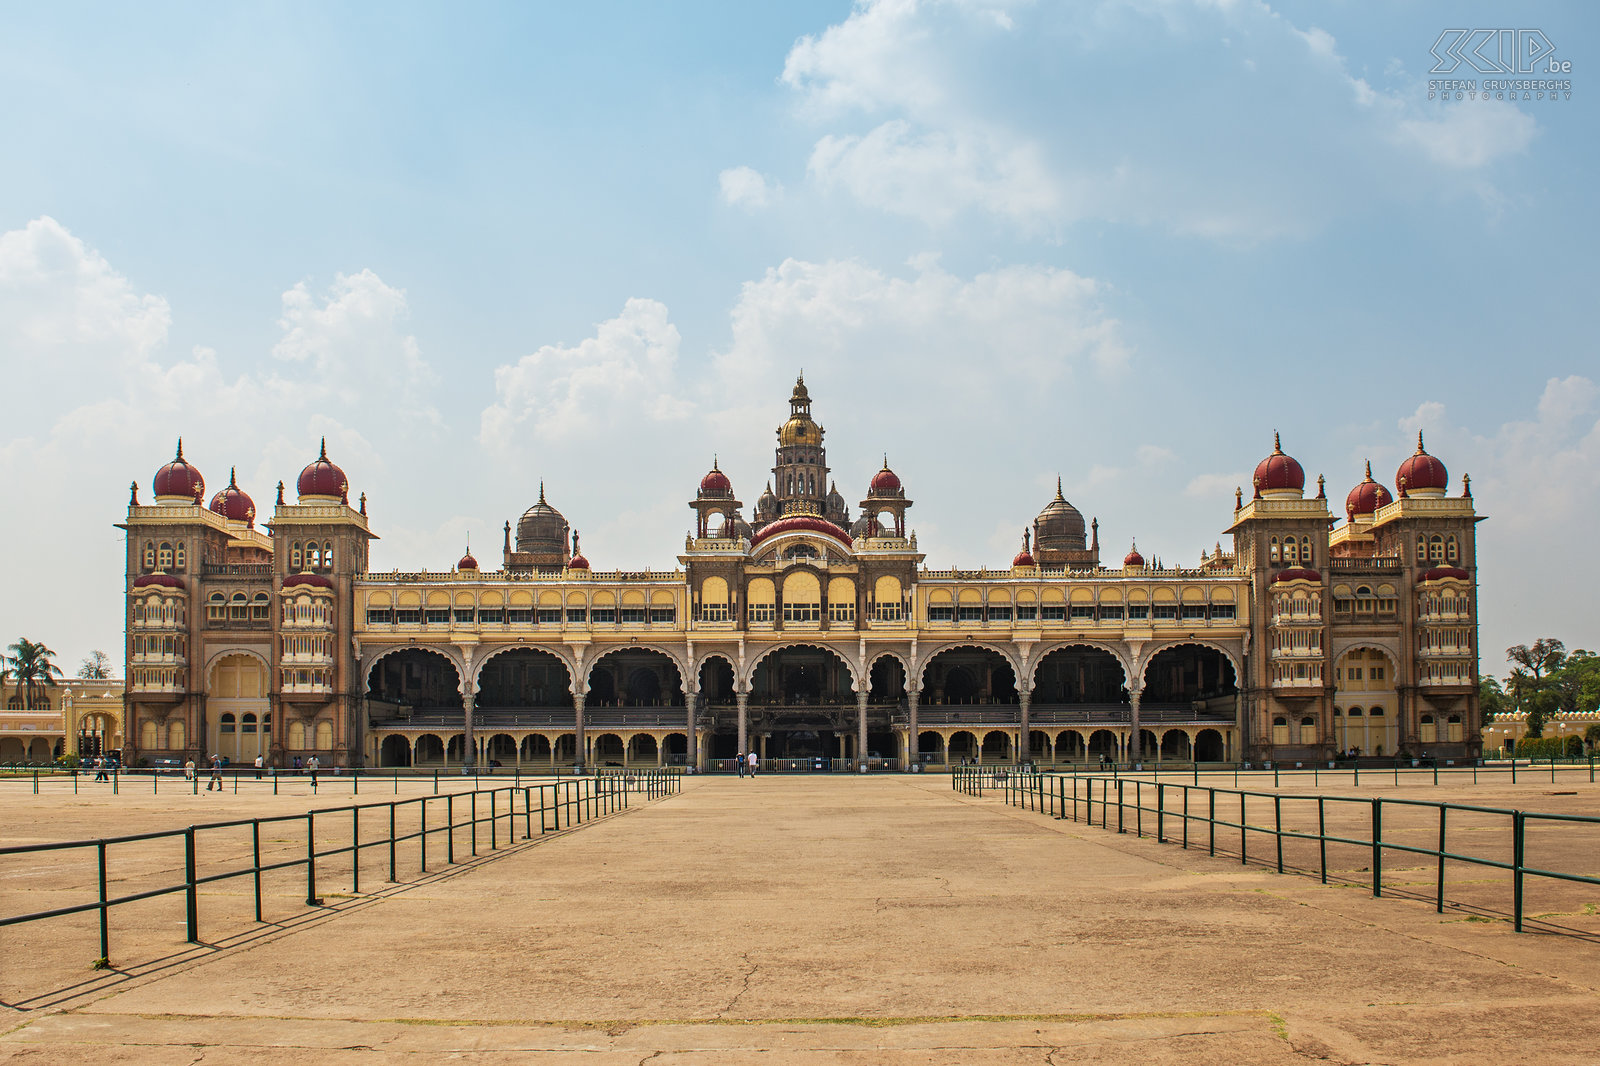 Mysore - Palace Mysore is the second largest city in the state of Karnataka with 740,000 inhabitants. Mysore is known for its many palaces and is therefore also called 'City of Palaces'. We visited the magnificent Palace of the Maharajah, a mix of Hindu and Muslim style, built at the end of the 19th century. It is one of the largest palaces in India. Stefan Cruysberghs